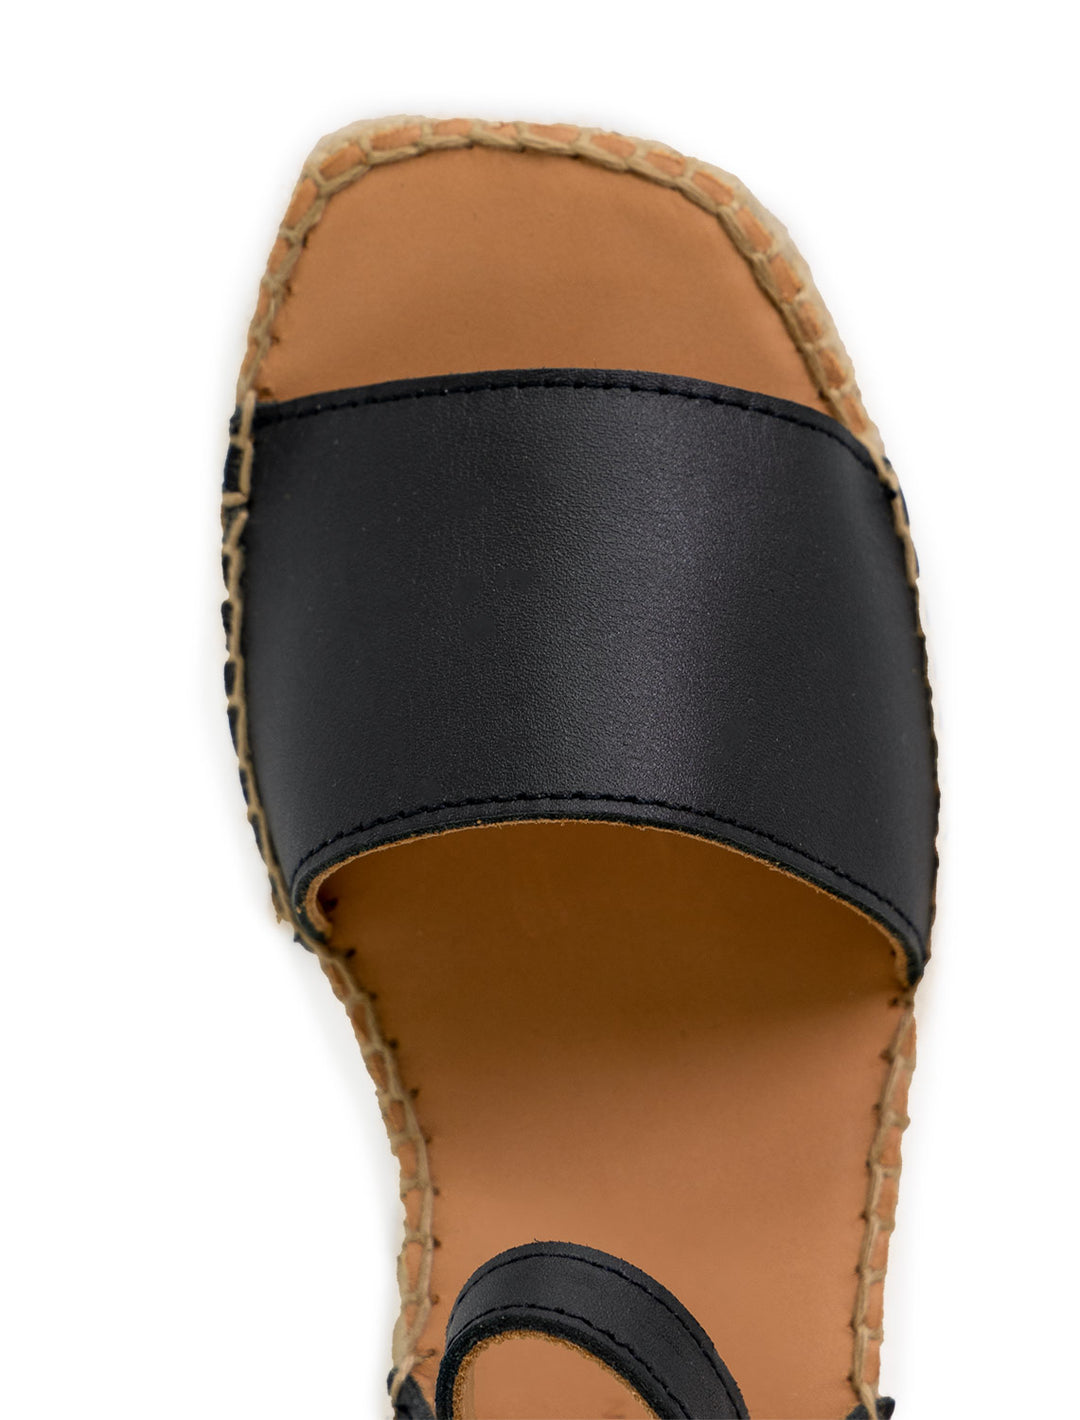 Close-up view of Naguisa's rall espadrille wedge in black.